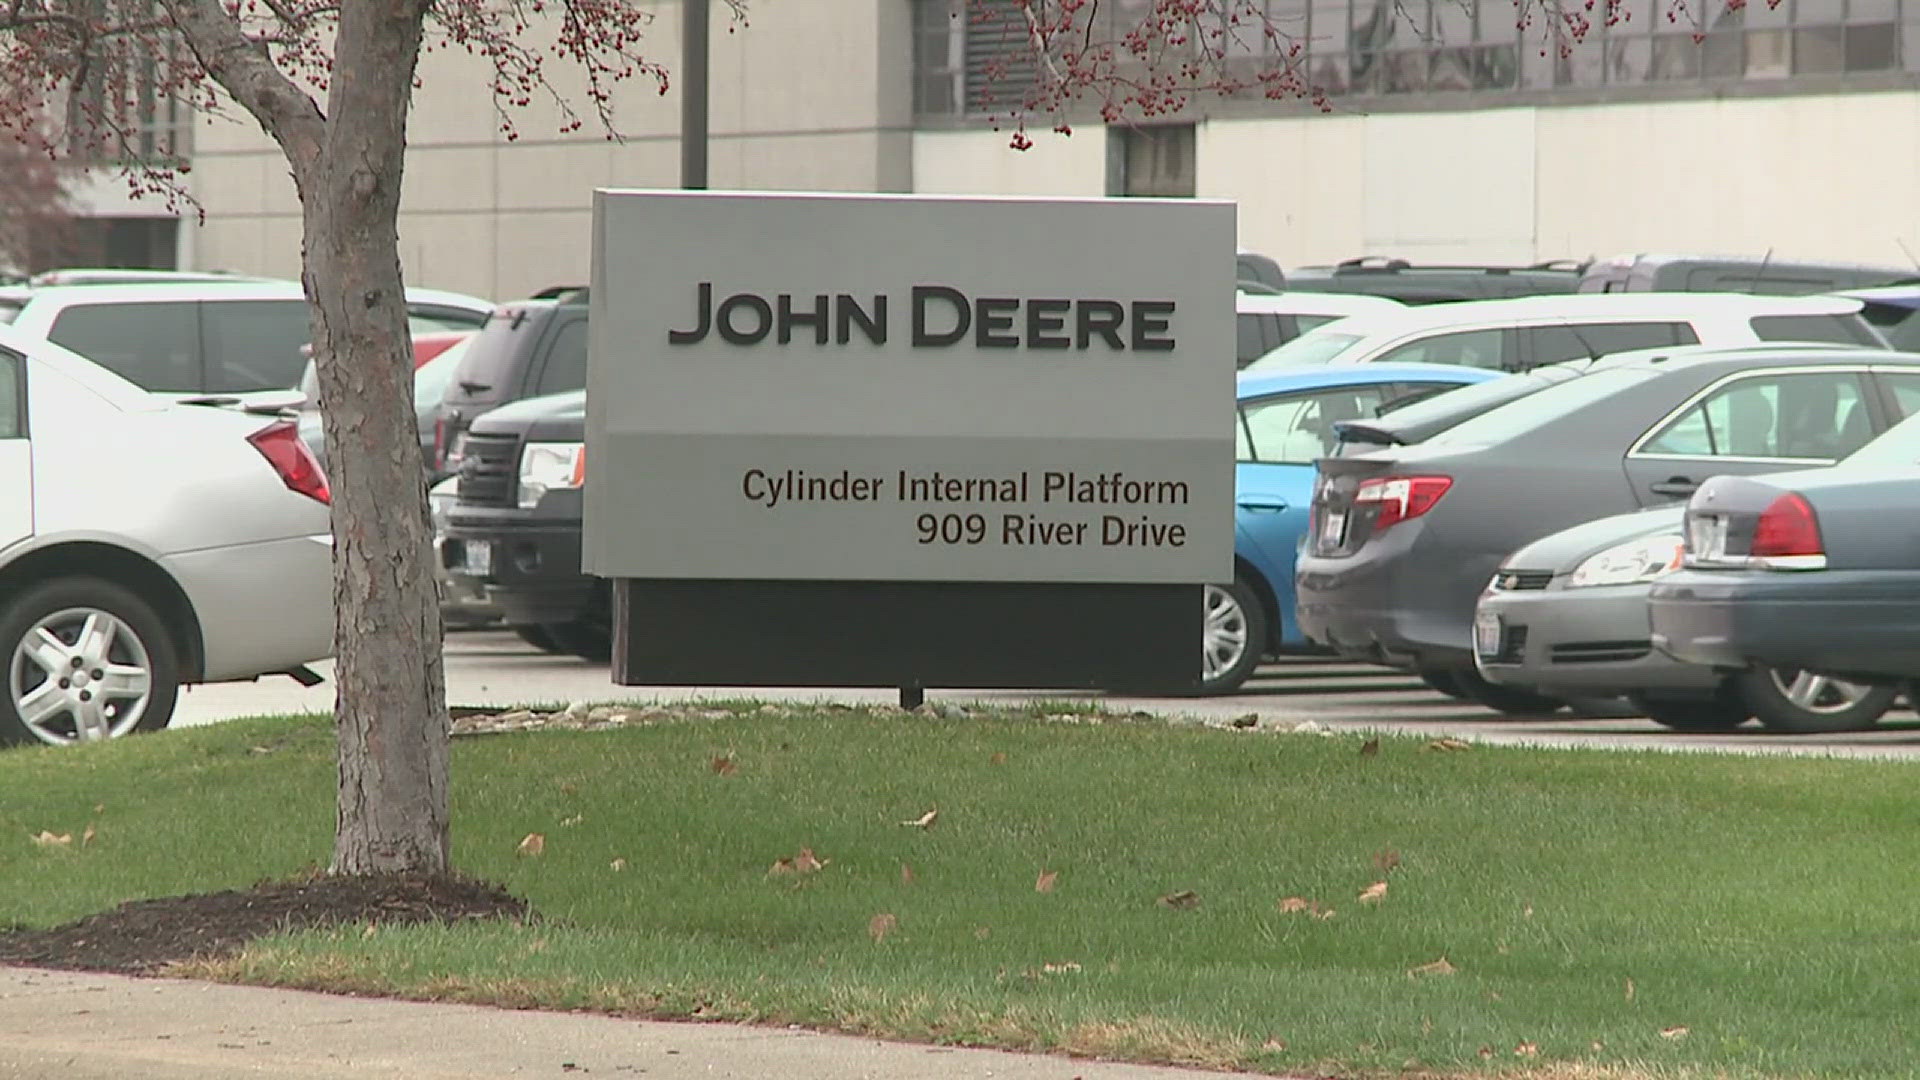 John Deere is laying off 34 production employees at its Moline Cylinder Works factory at the end of the month.